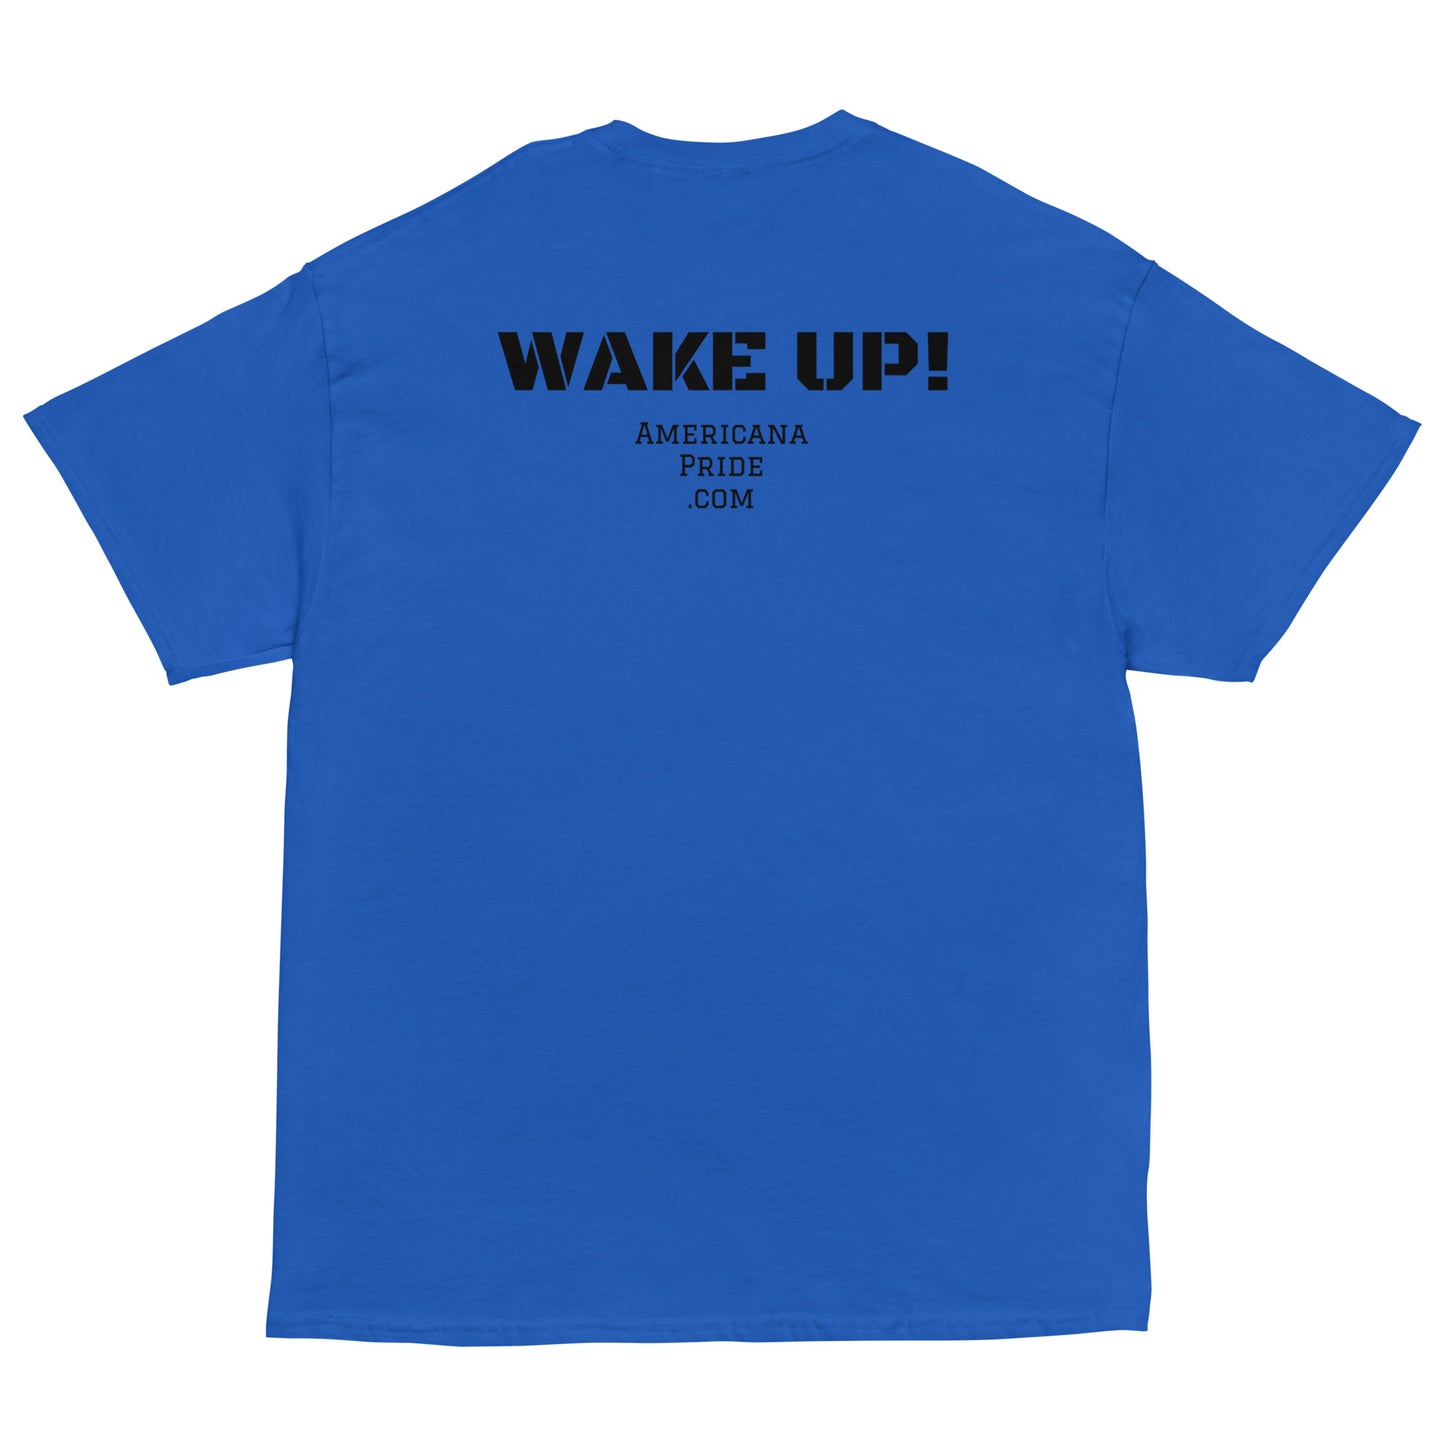 If you're not part of the movement you ARE the movement - Wake up! (Black lettering)